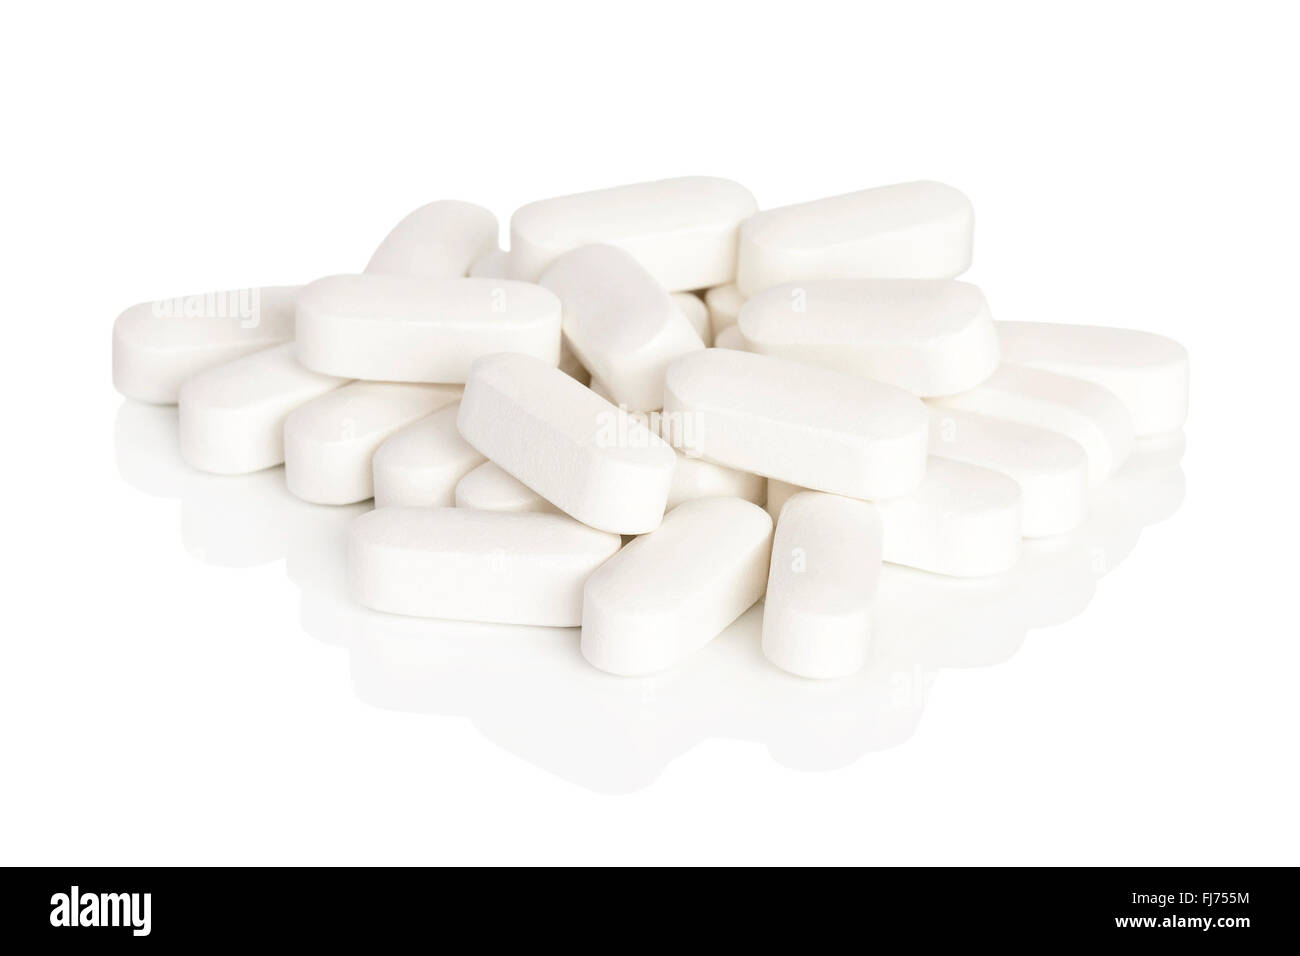 A pile of calcium vitamin supplement tablets isolated on a white background. Stock Photo